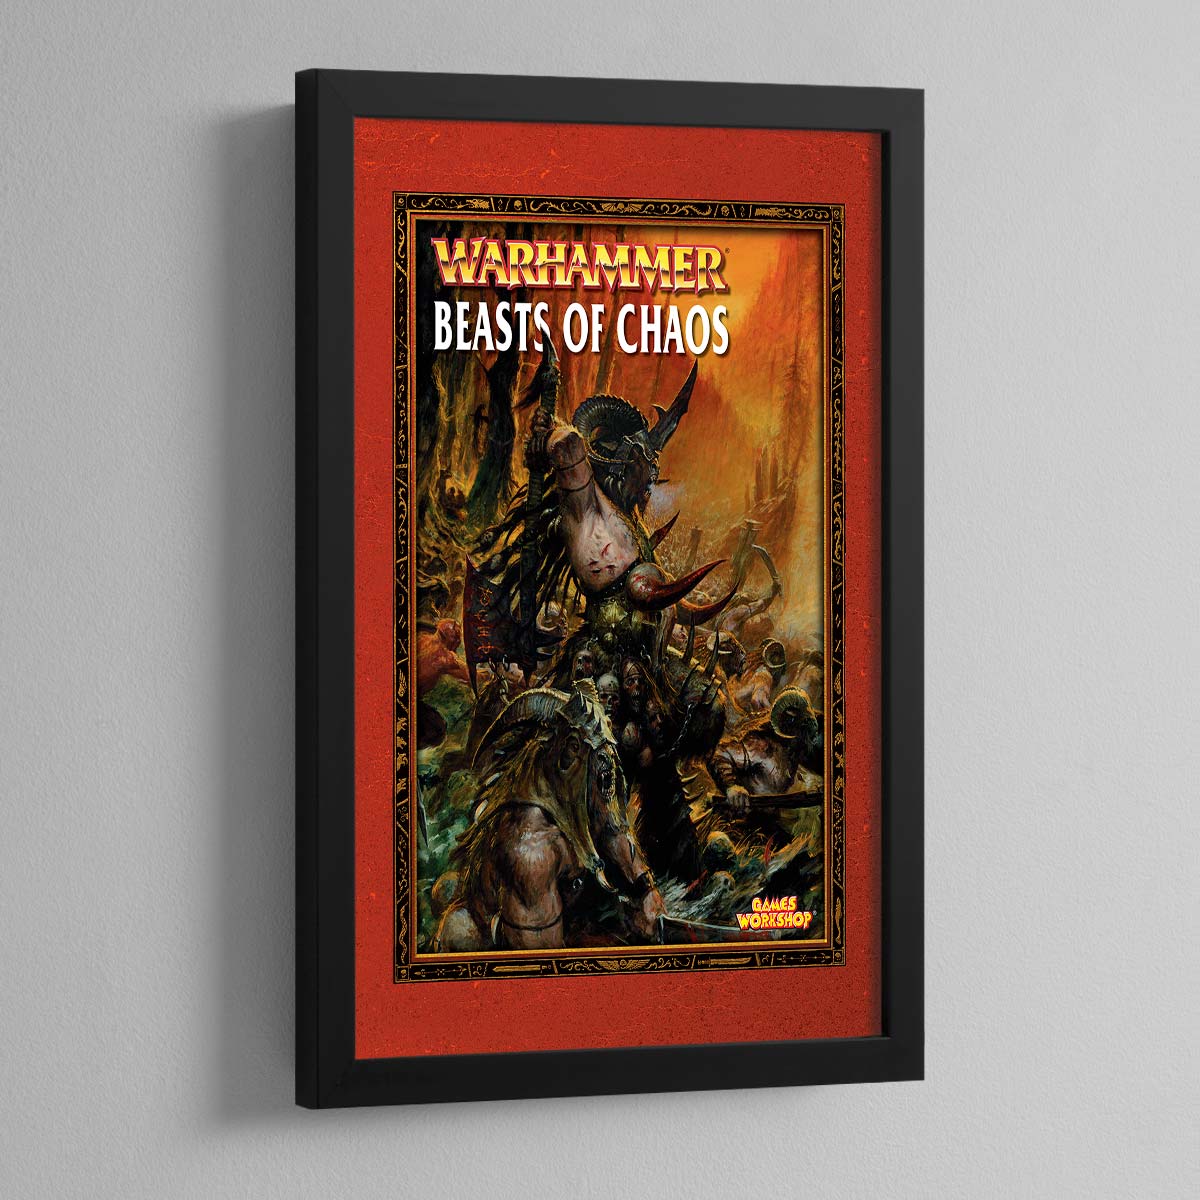 Warhammer Fantasy Battle 6th Edition – Beasts of Chaos – Frame